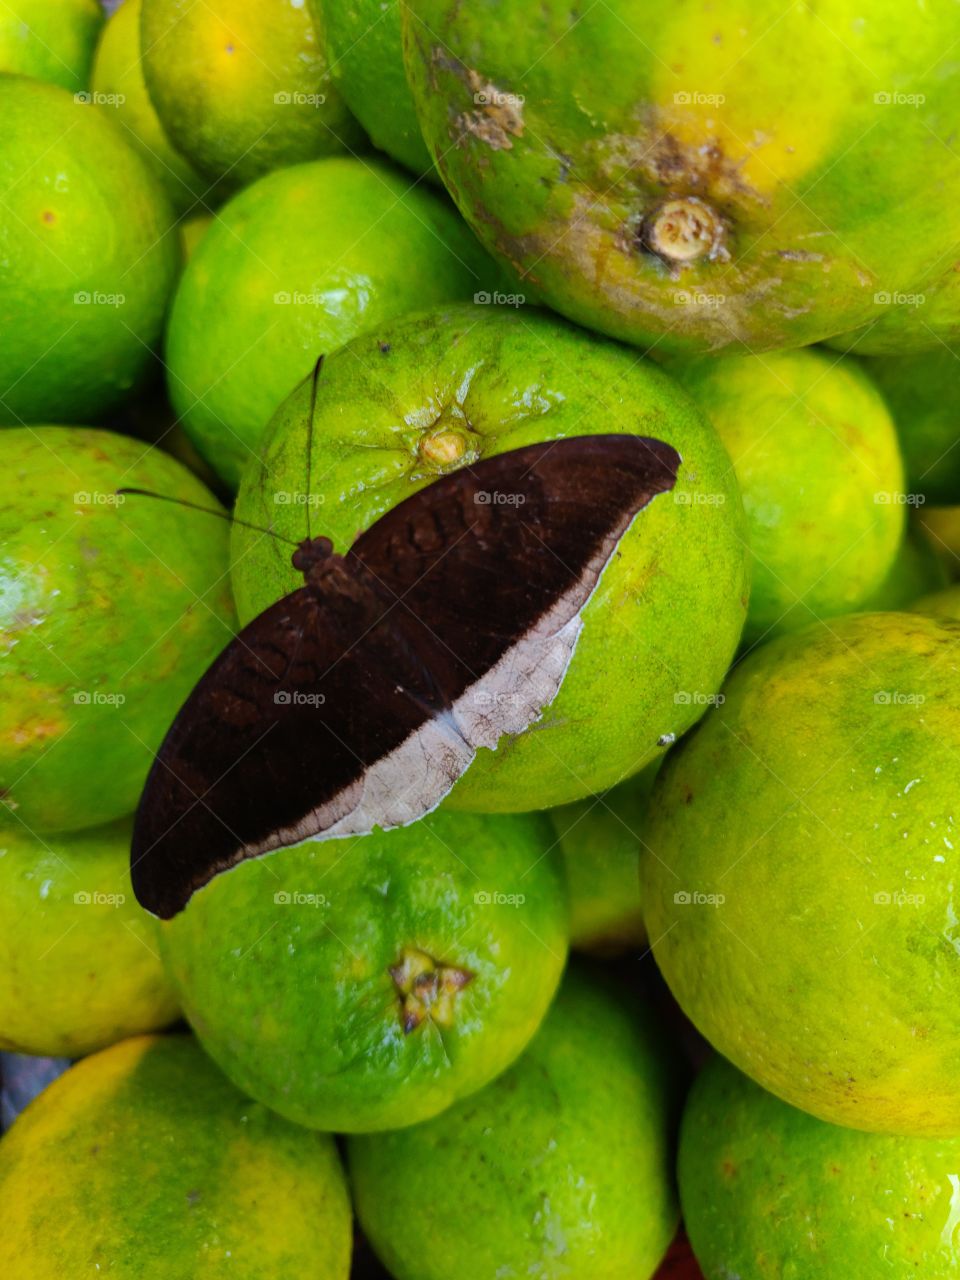 butterfly on green sweetlimes